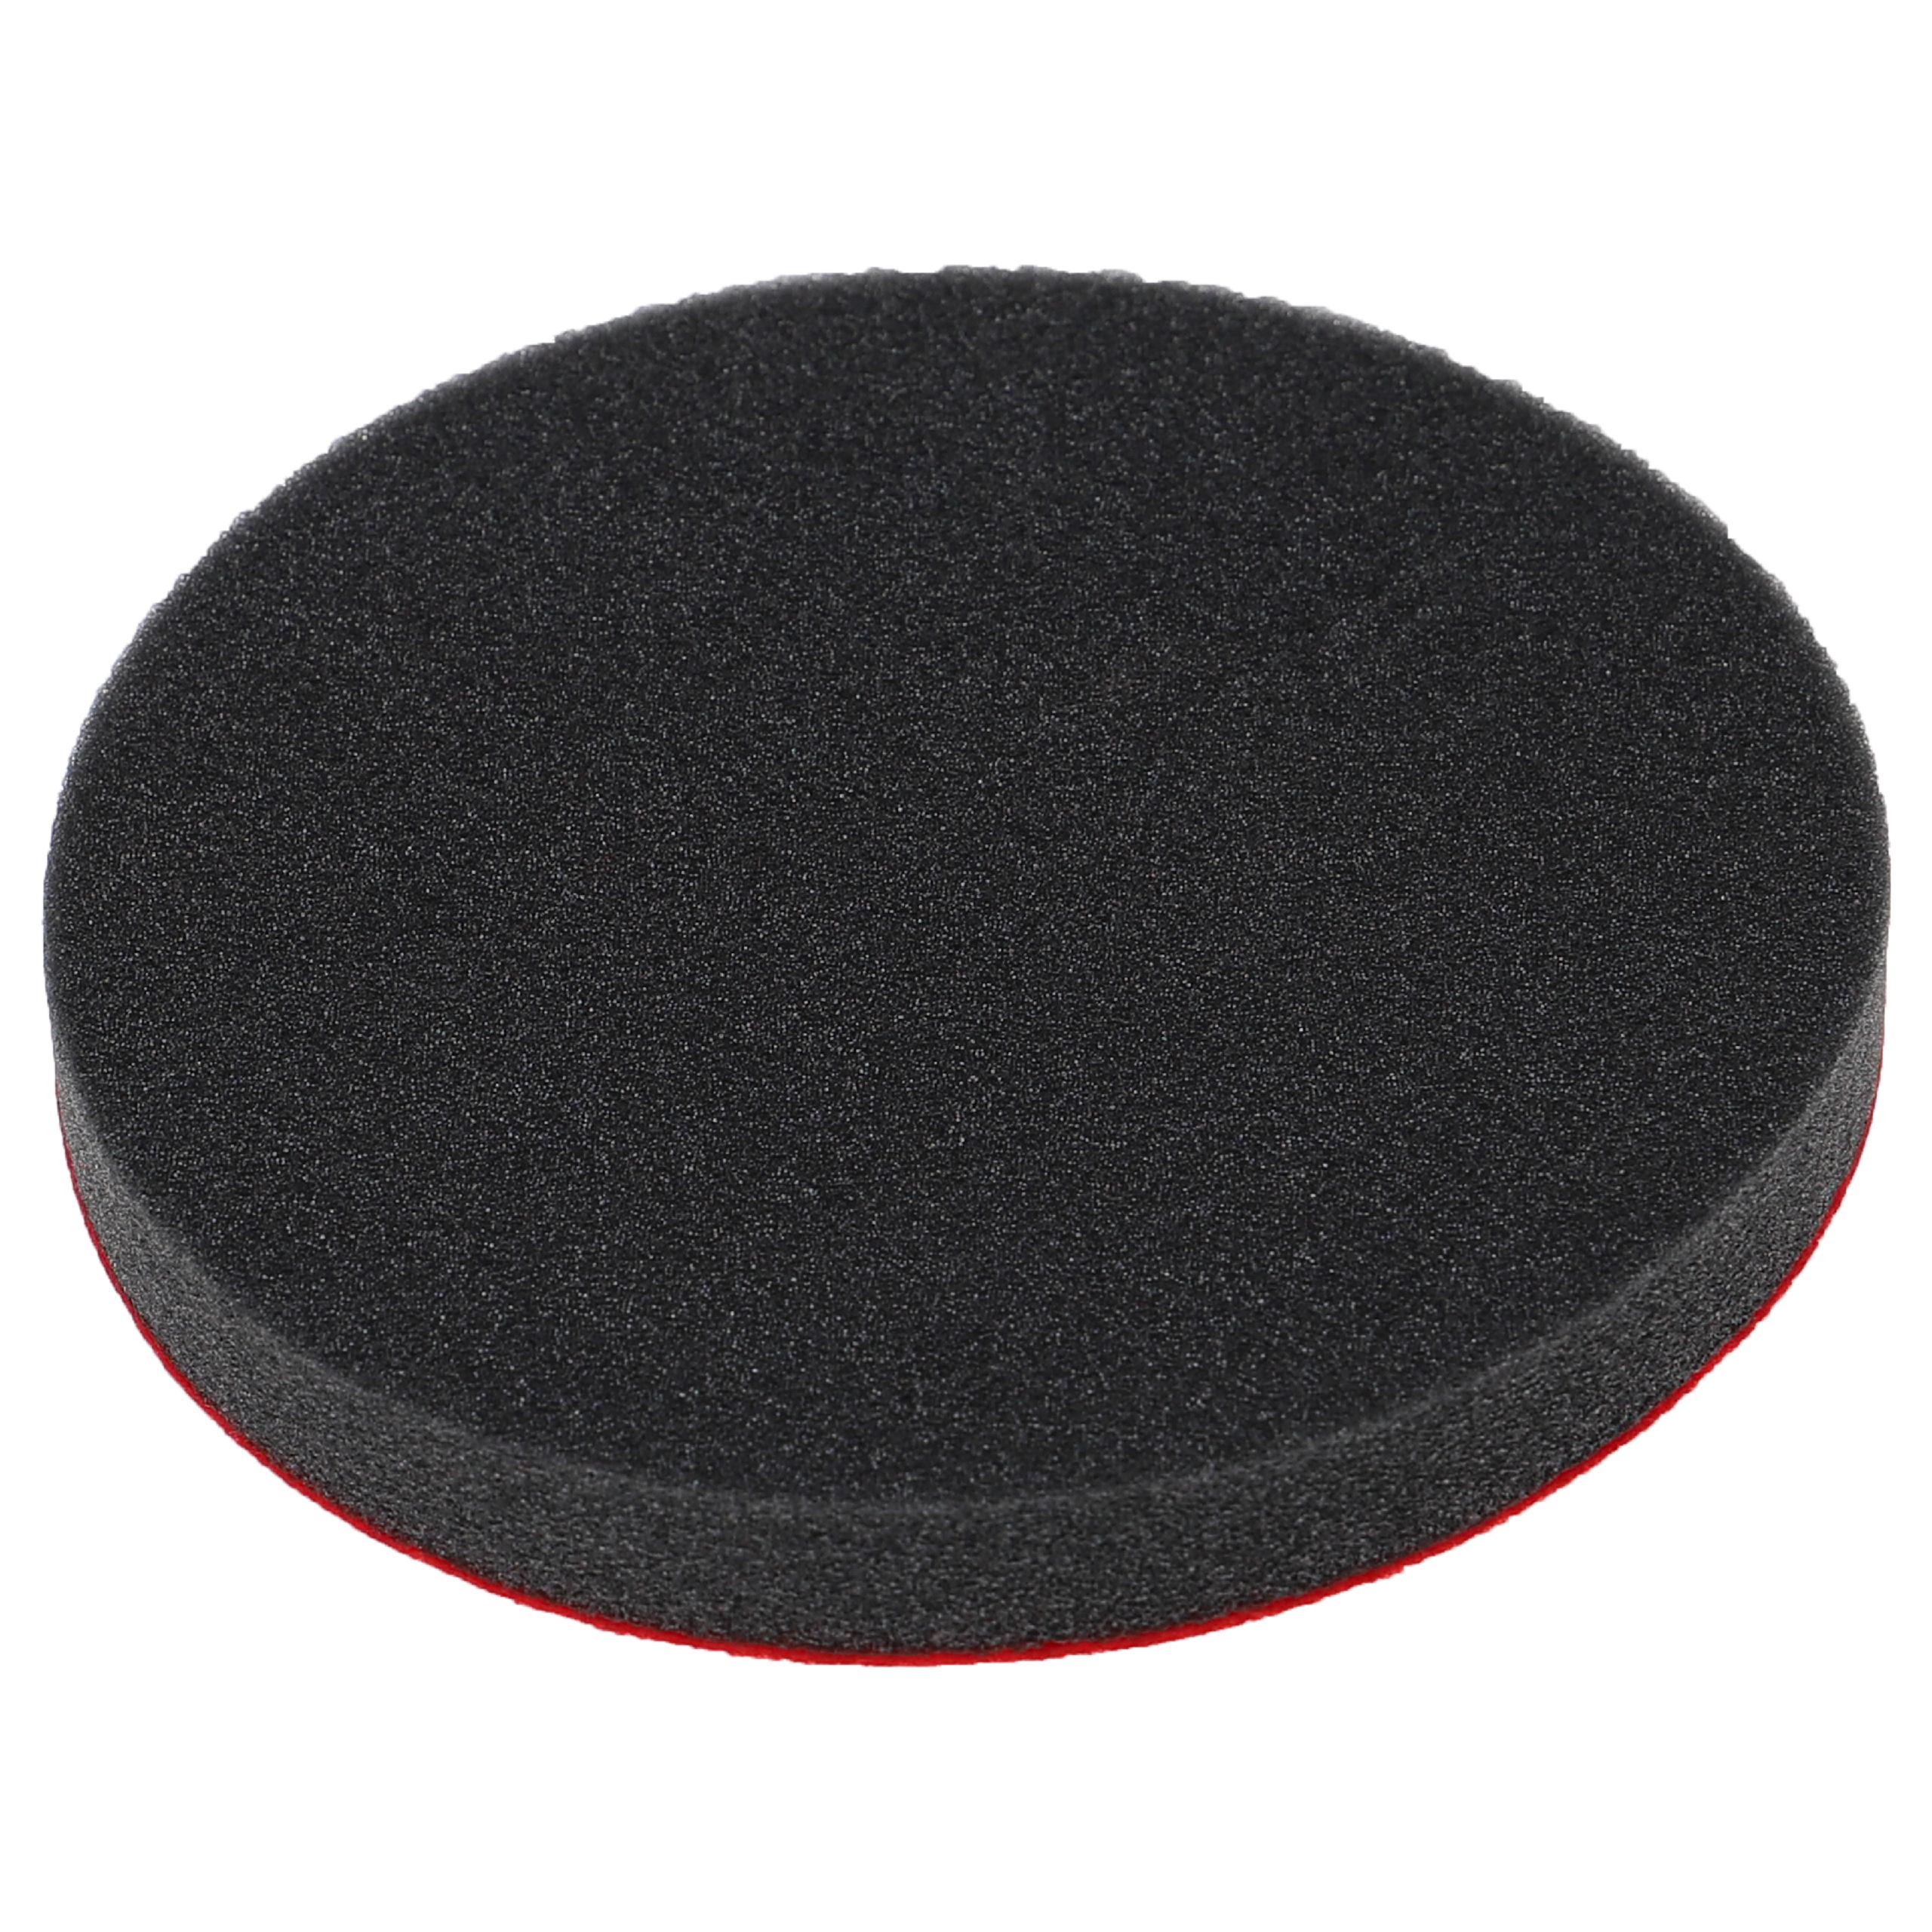 Polishing Pad as Replacement for Bosch 2609256051 for Polishing Machines - 12.5 cm Diameter, 8 g